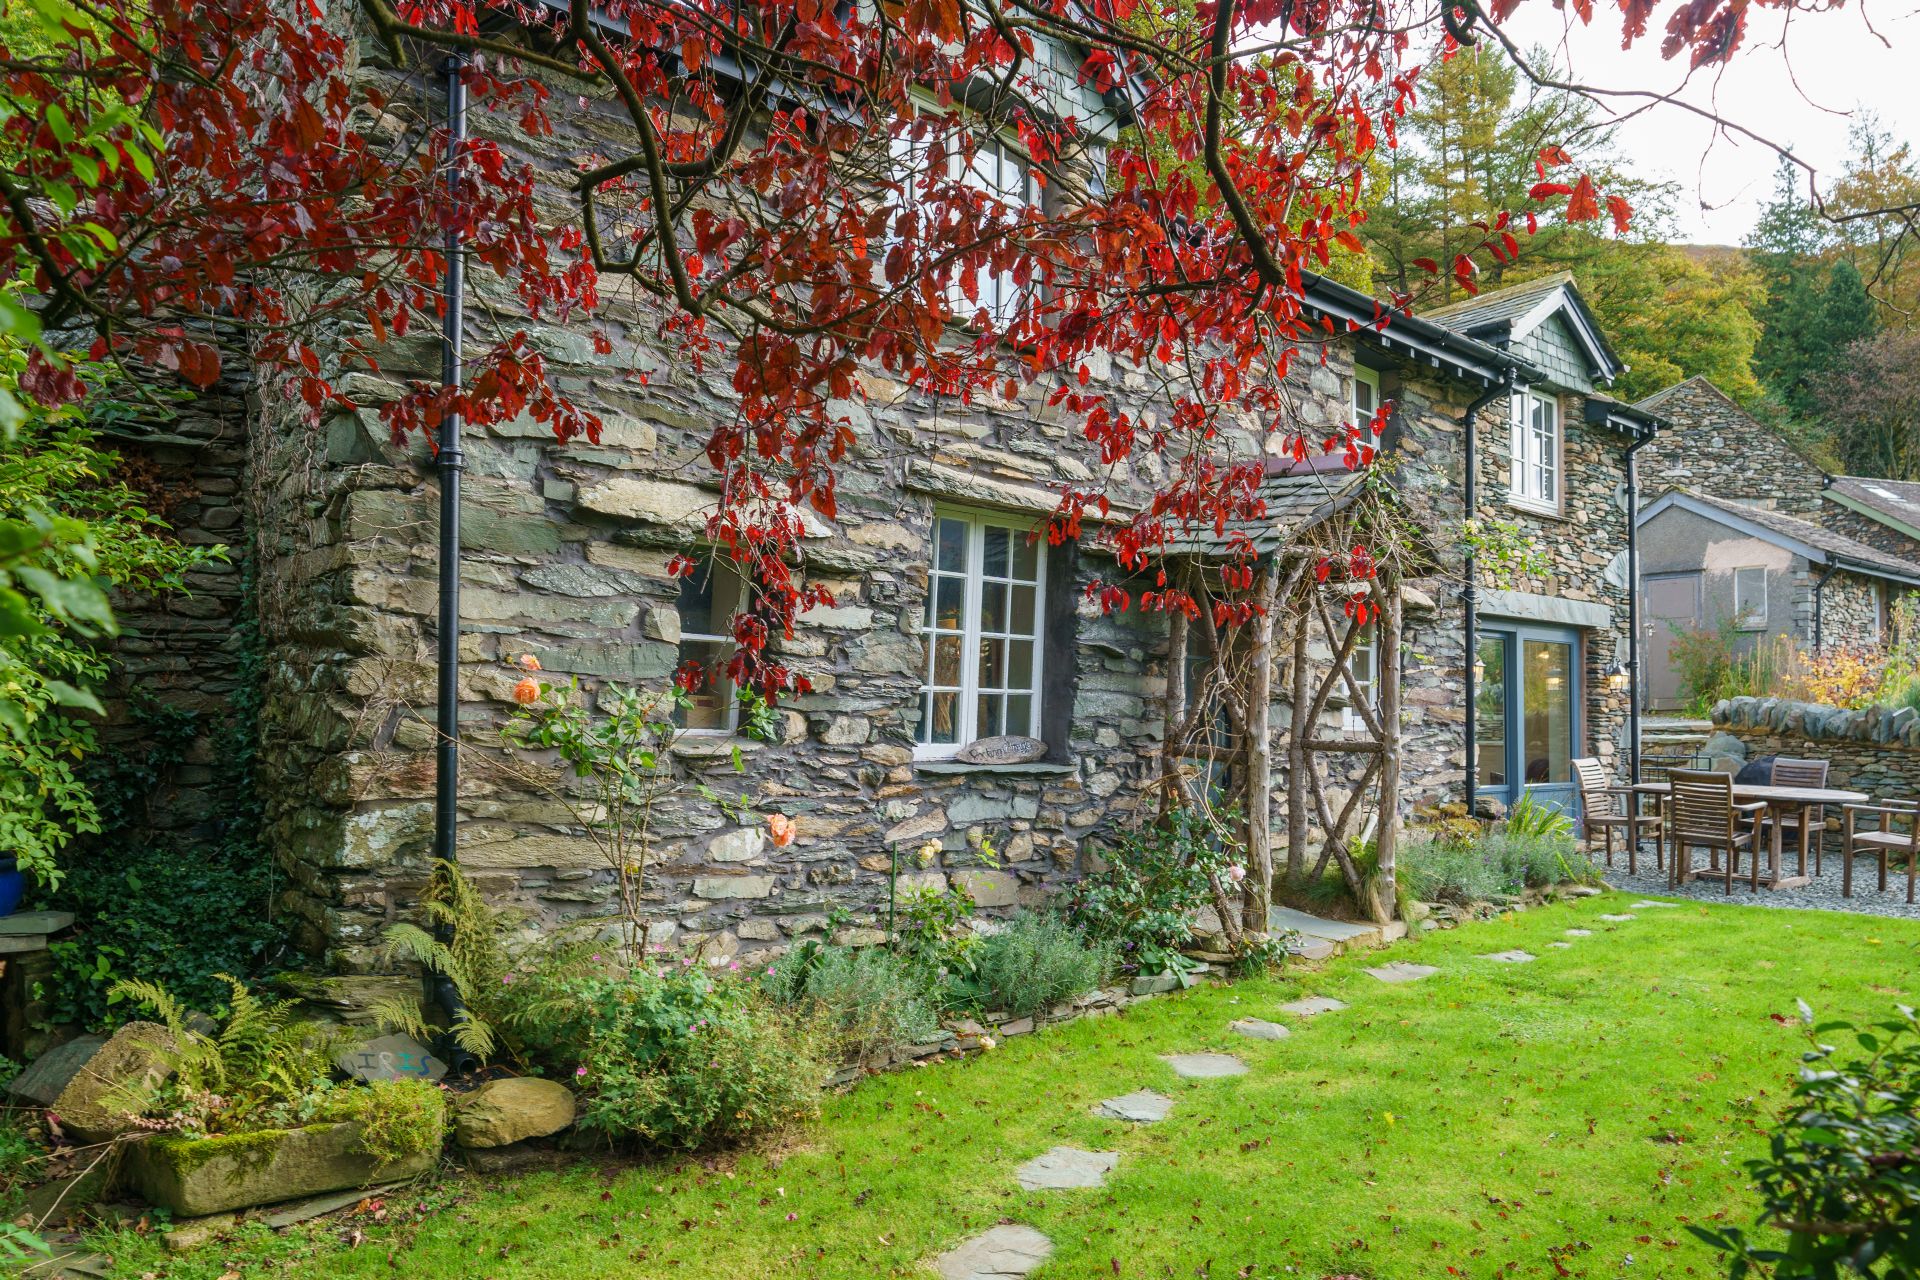 Rooking Cottage, Patterdale Holiday Cottage near Ullswater